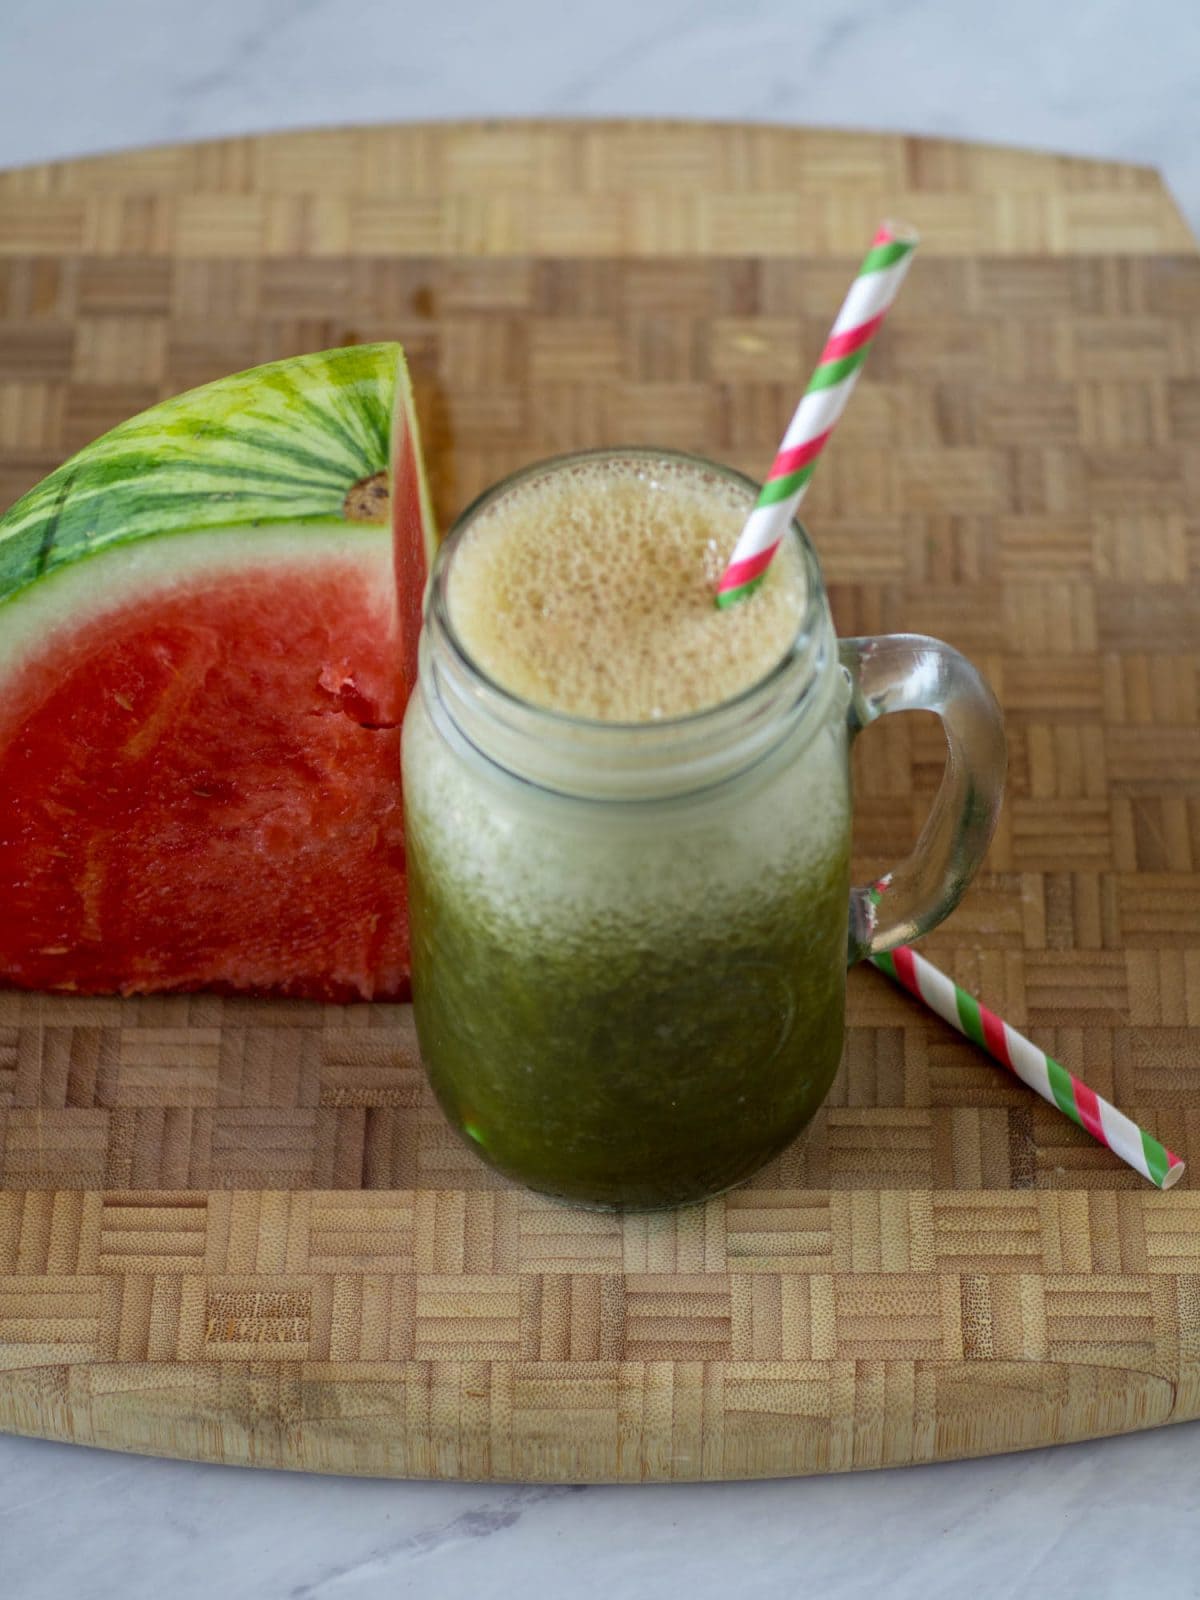 This tasty Kale Watermelon smoothie recipe is an easy summertime breakfast smoothie. This dairy free watermelon smoothie adds kale and banana for a creamy treat. #smoothie #kale #watermelon #healthy #dairyfree